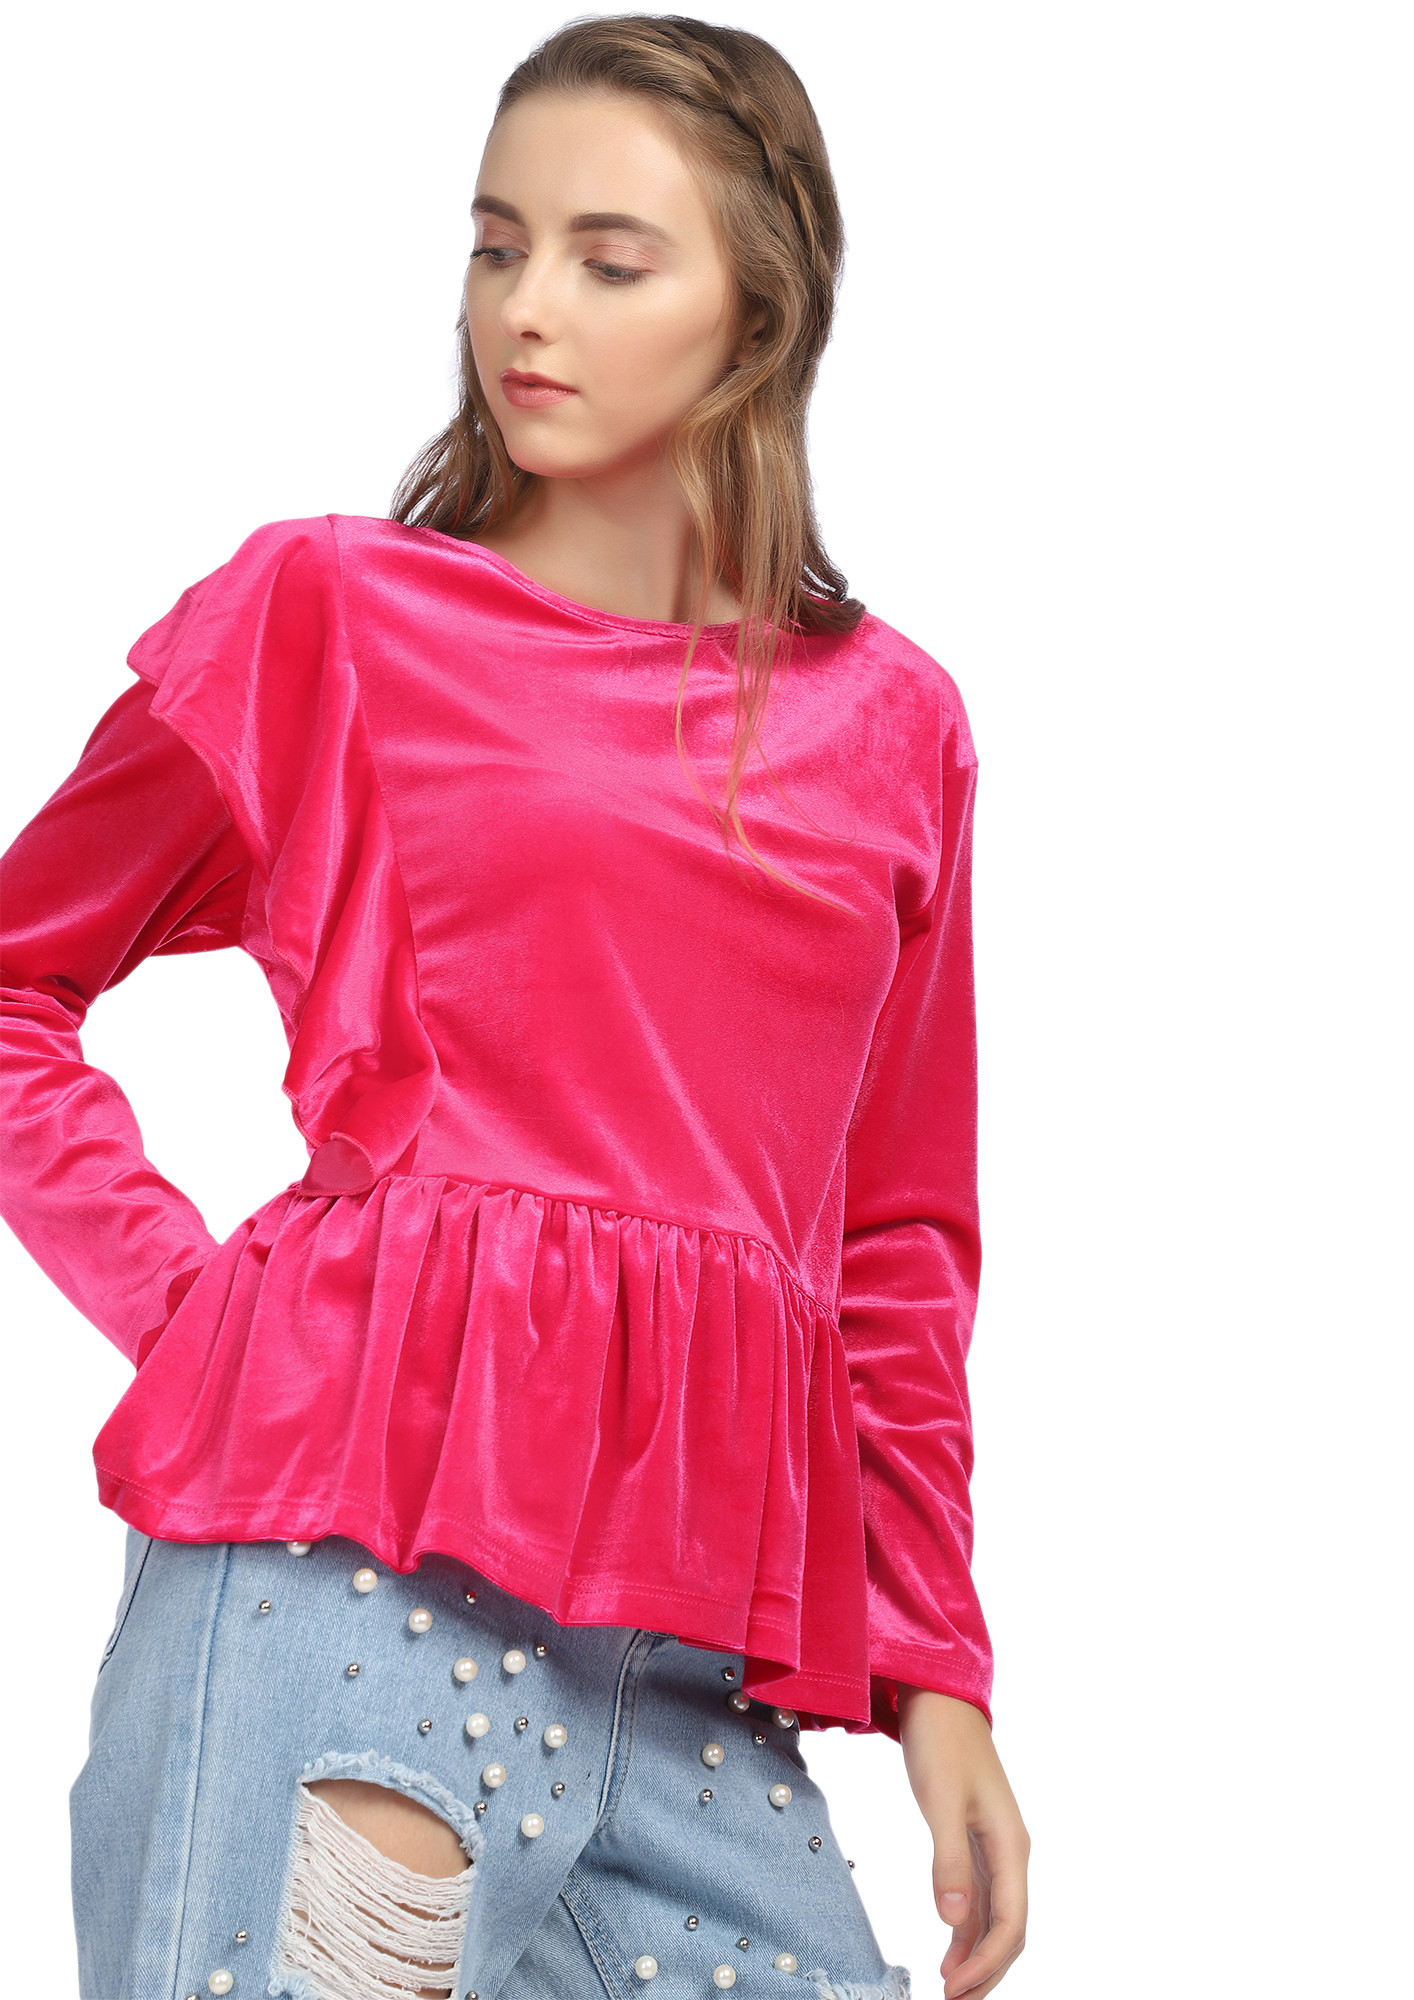 A LIL THRILL OF FRILL ROSE RED TOP